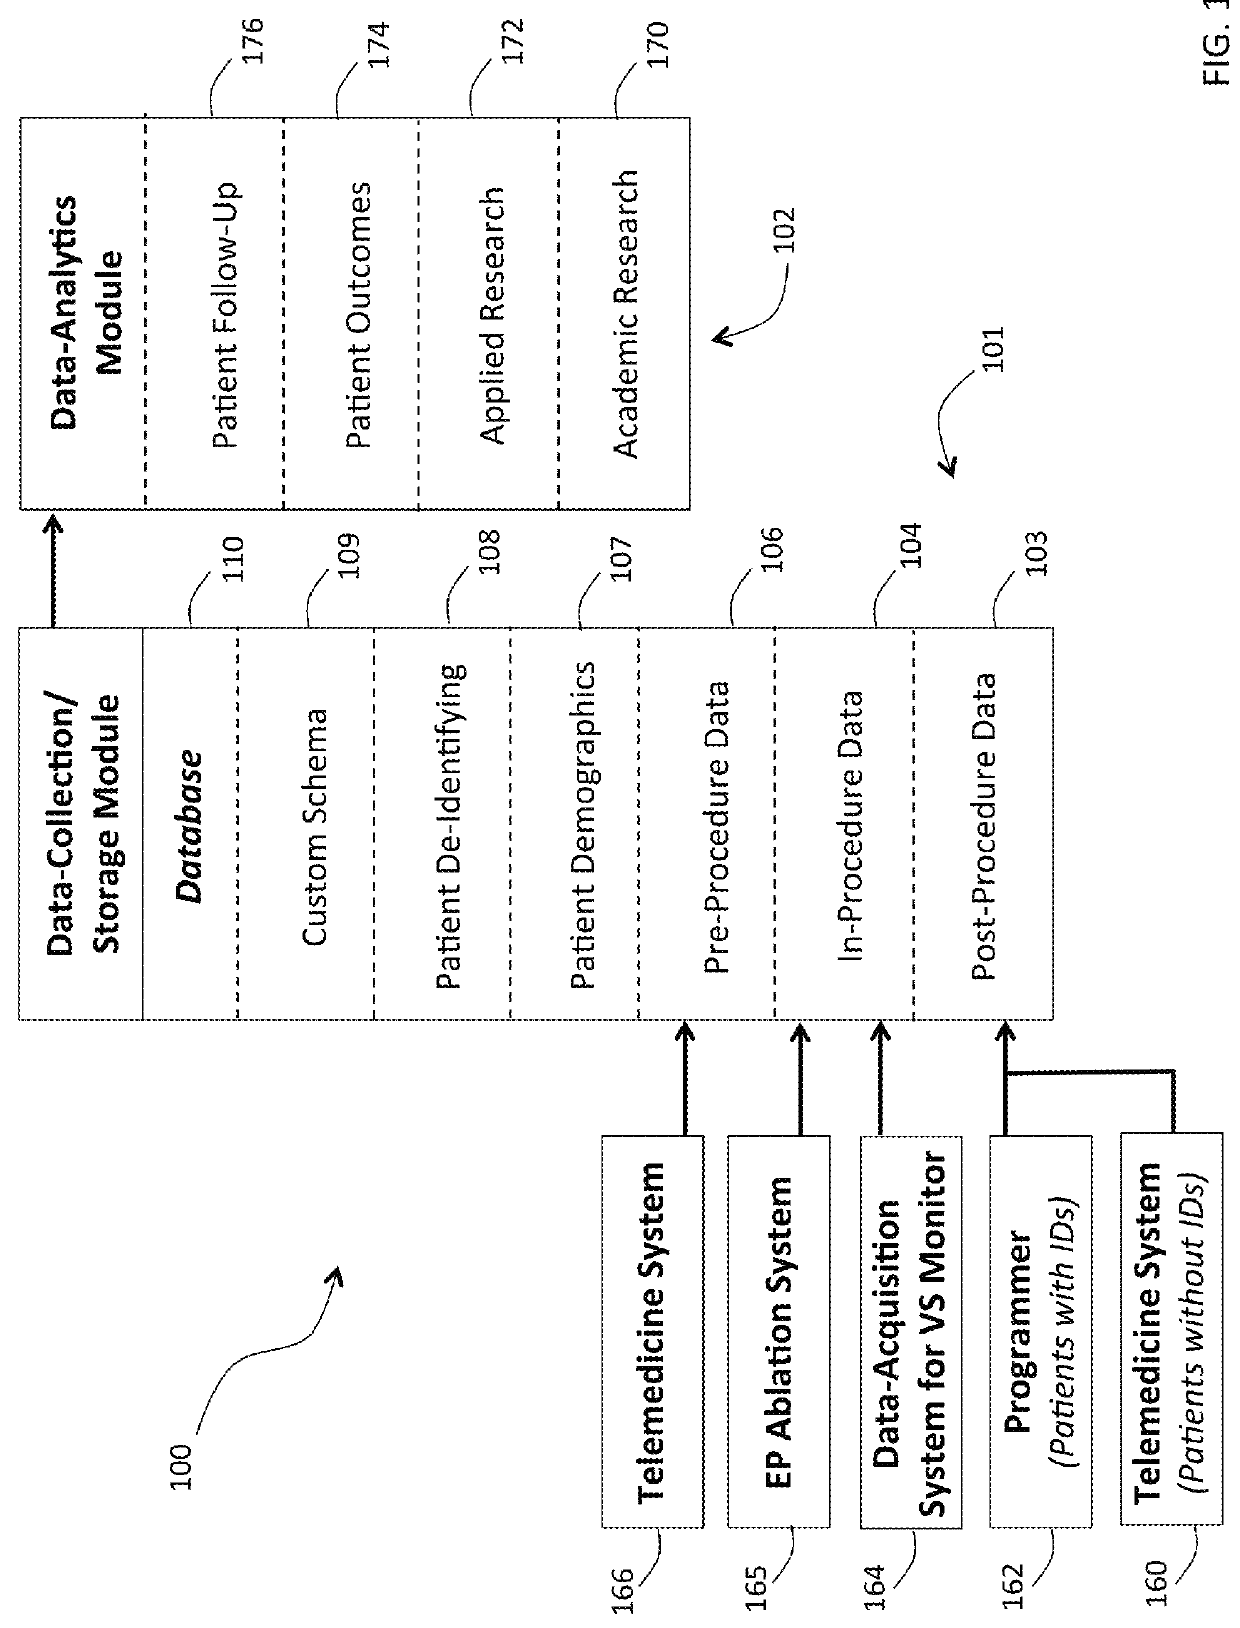 Database and algorithm for evaluating efficacy of an electrophysiology procedure